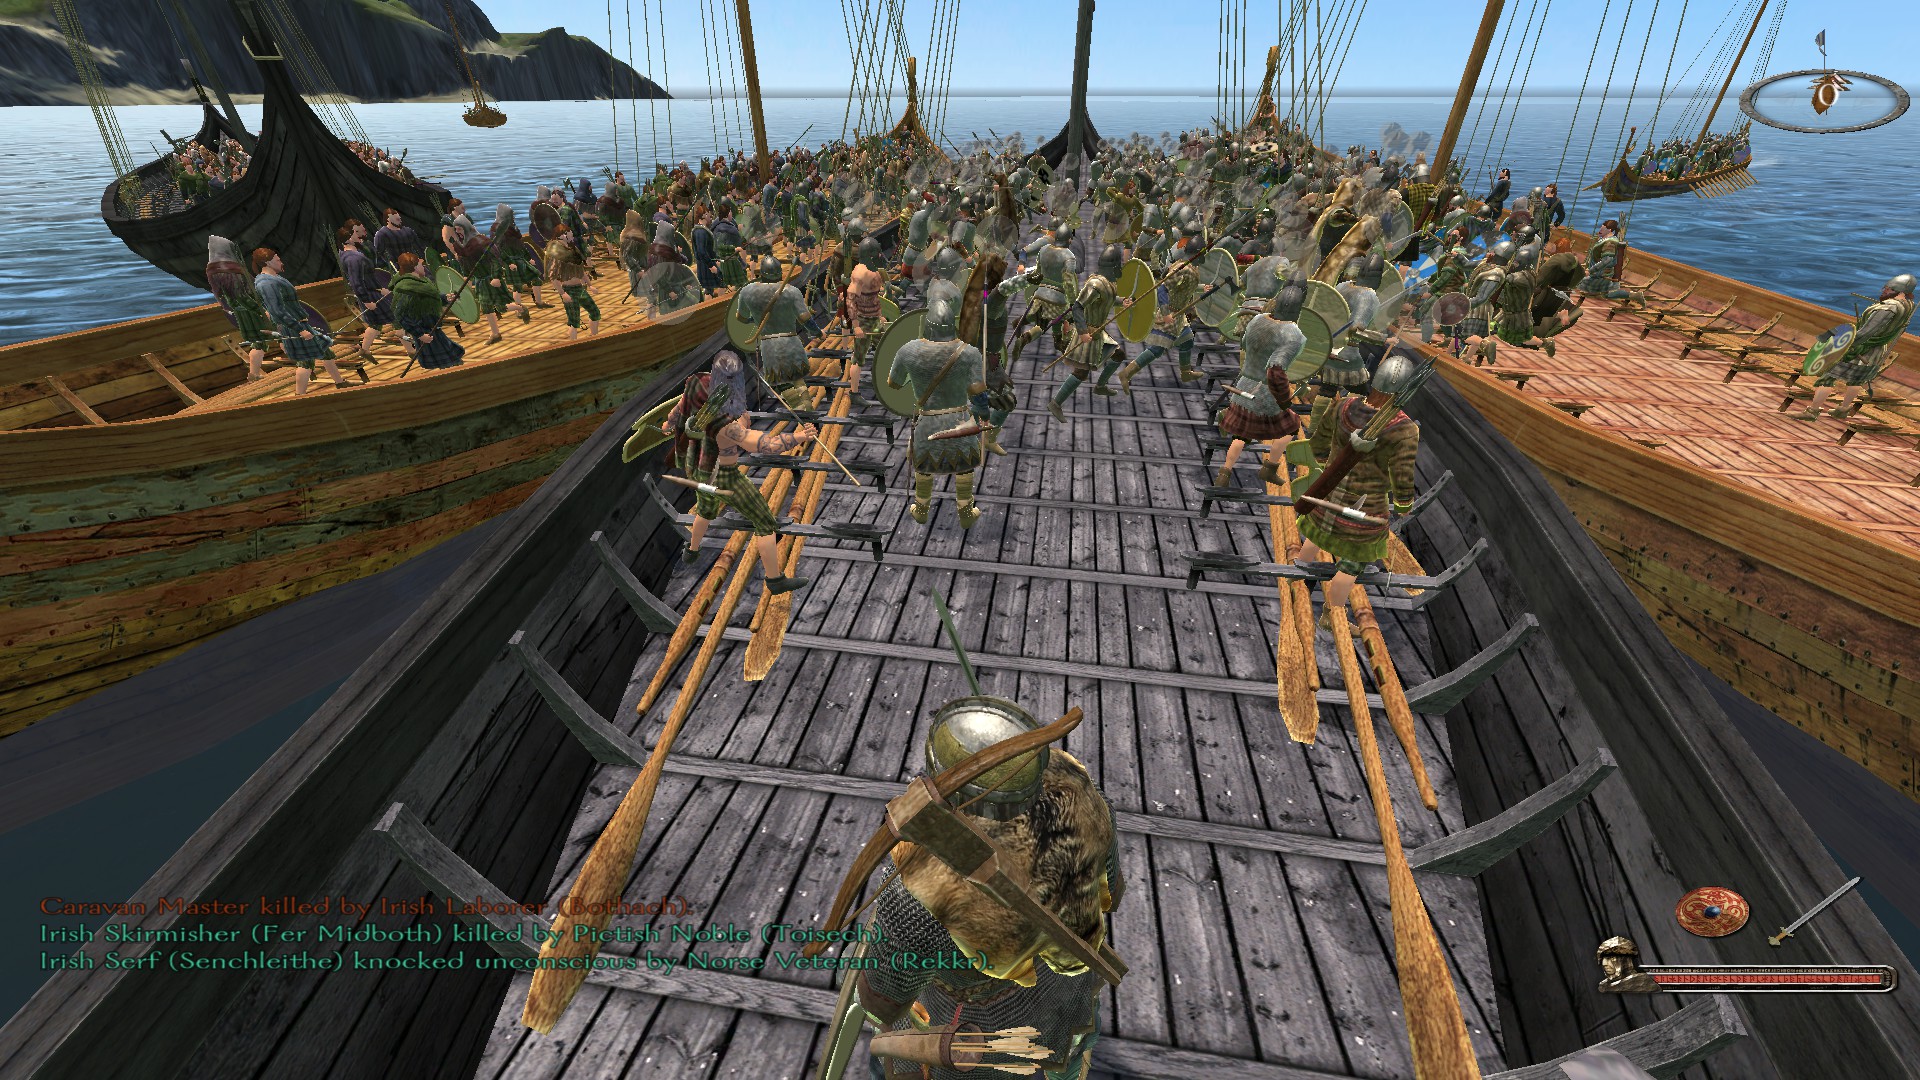 Viking Conquest Guide - Mount and blade warband viking conquest guide